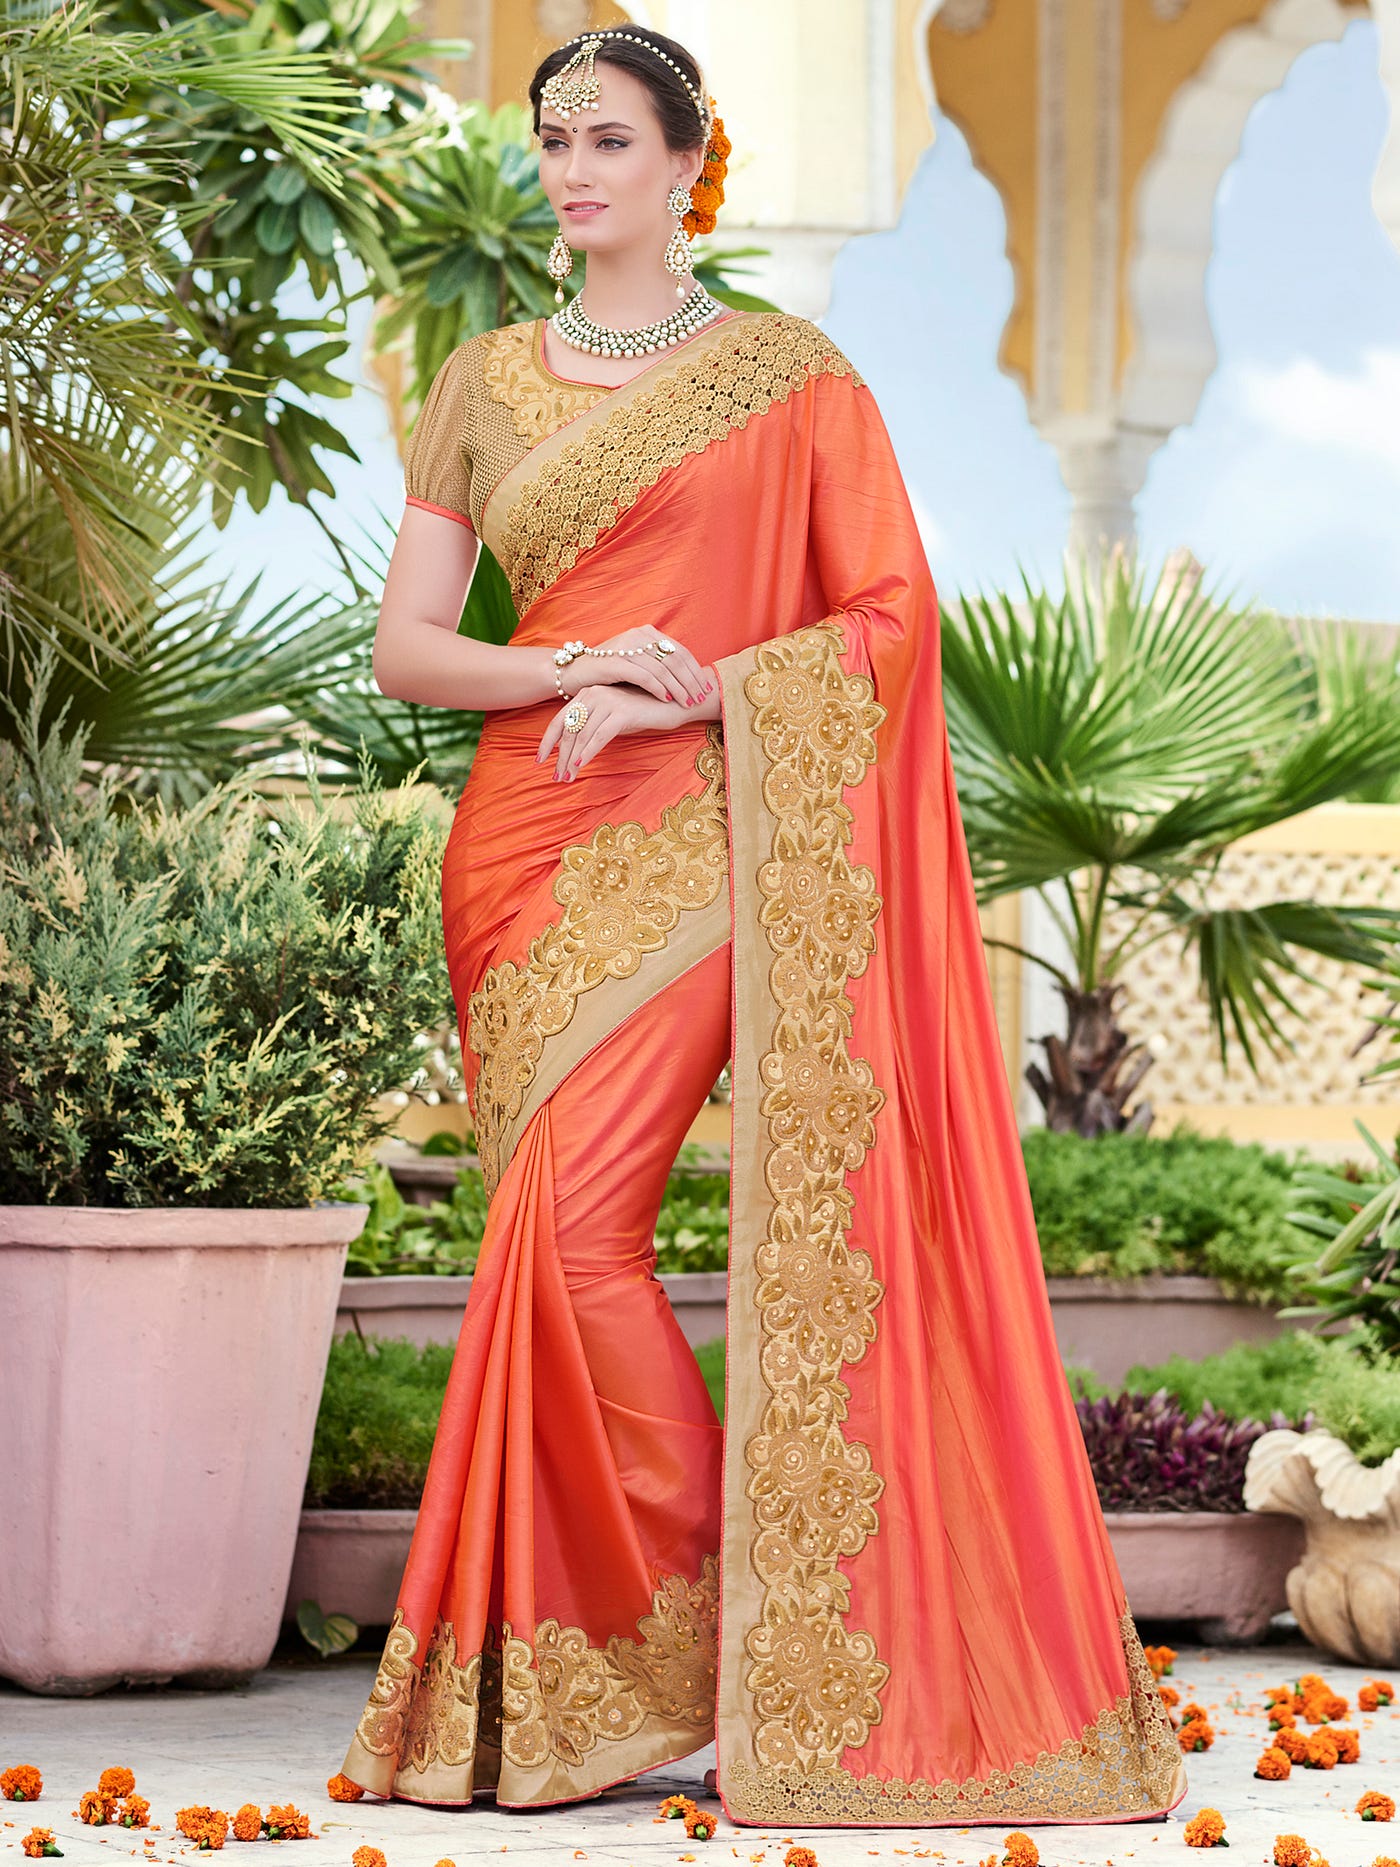 Stylish And Trndy Bridal Sarees. Sarees have been a vital piece of…, by  Ricky Hogh